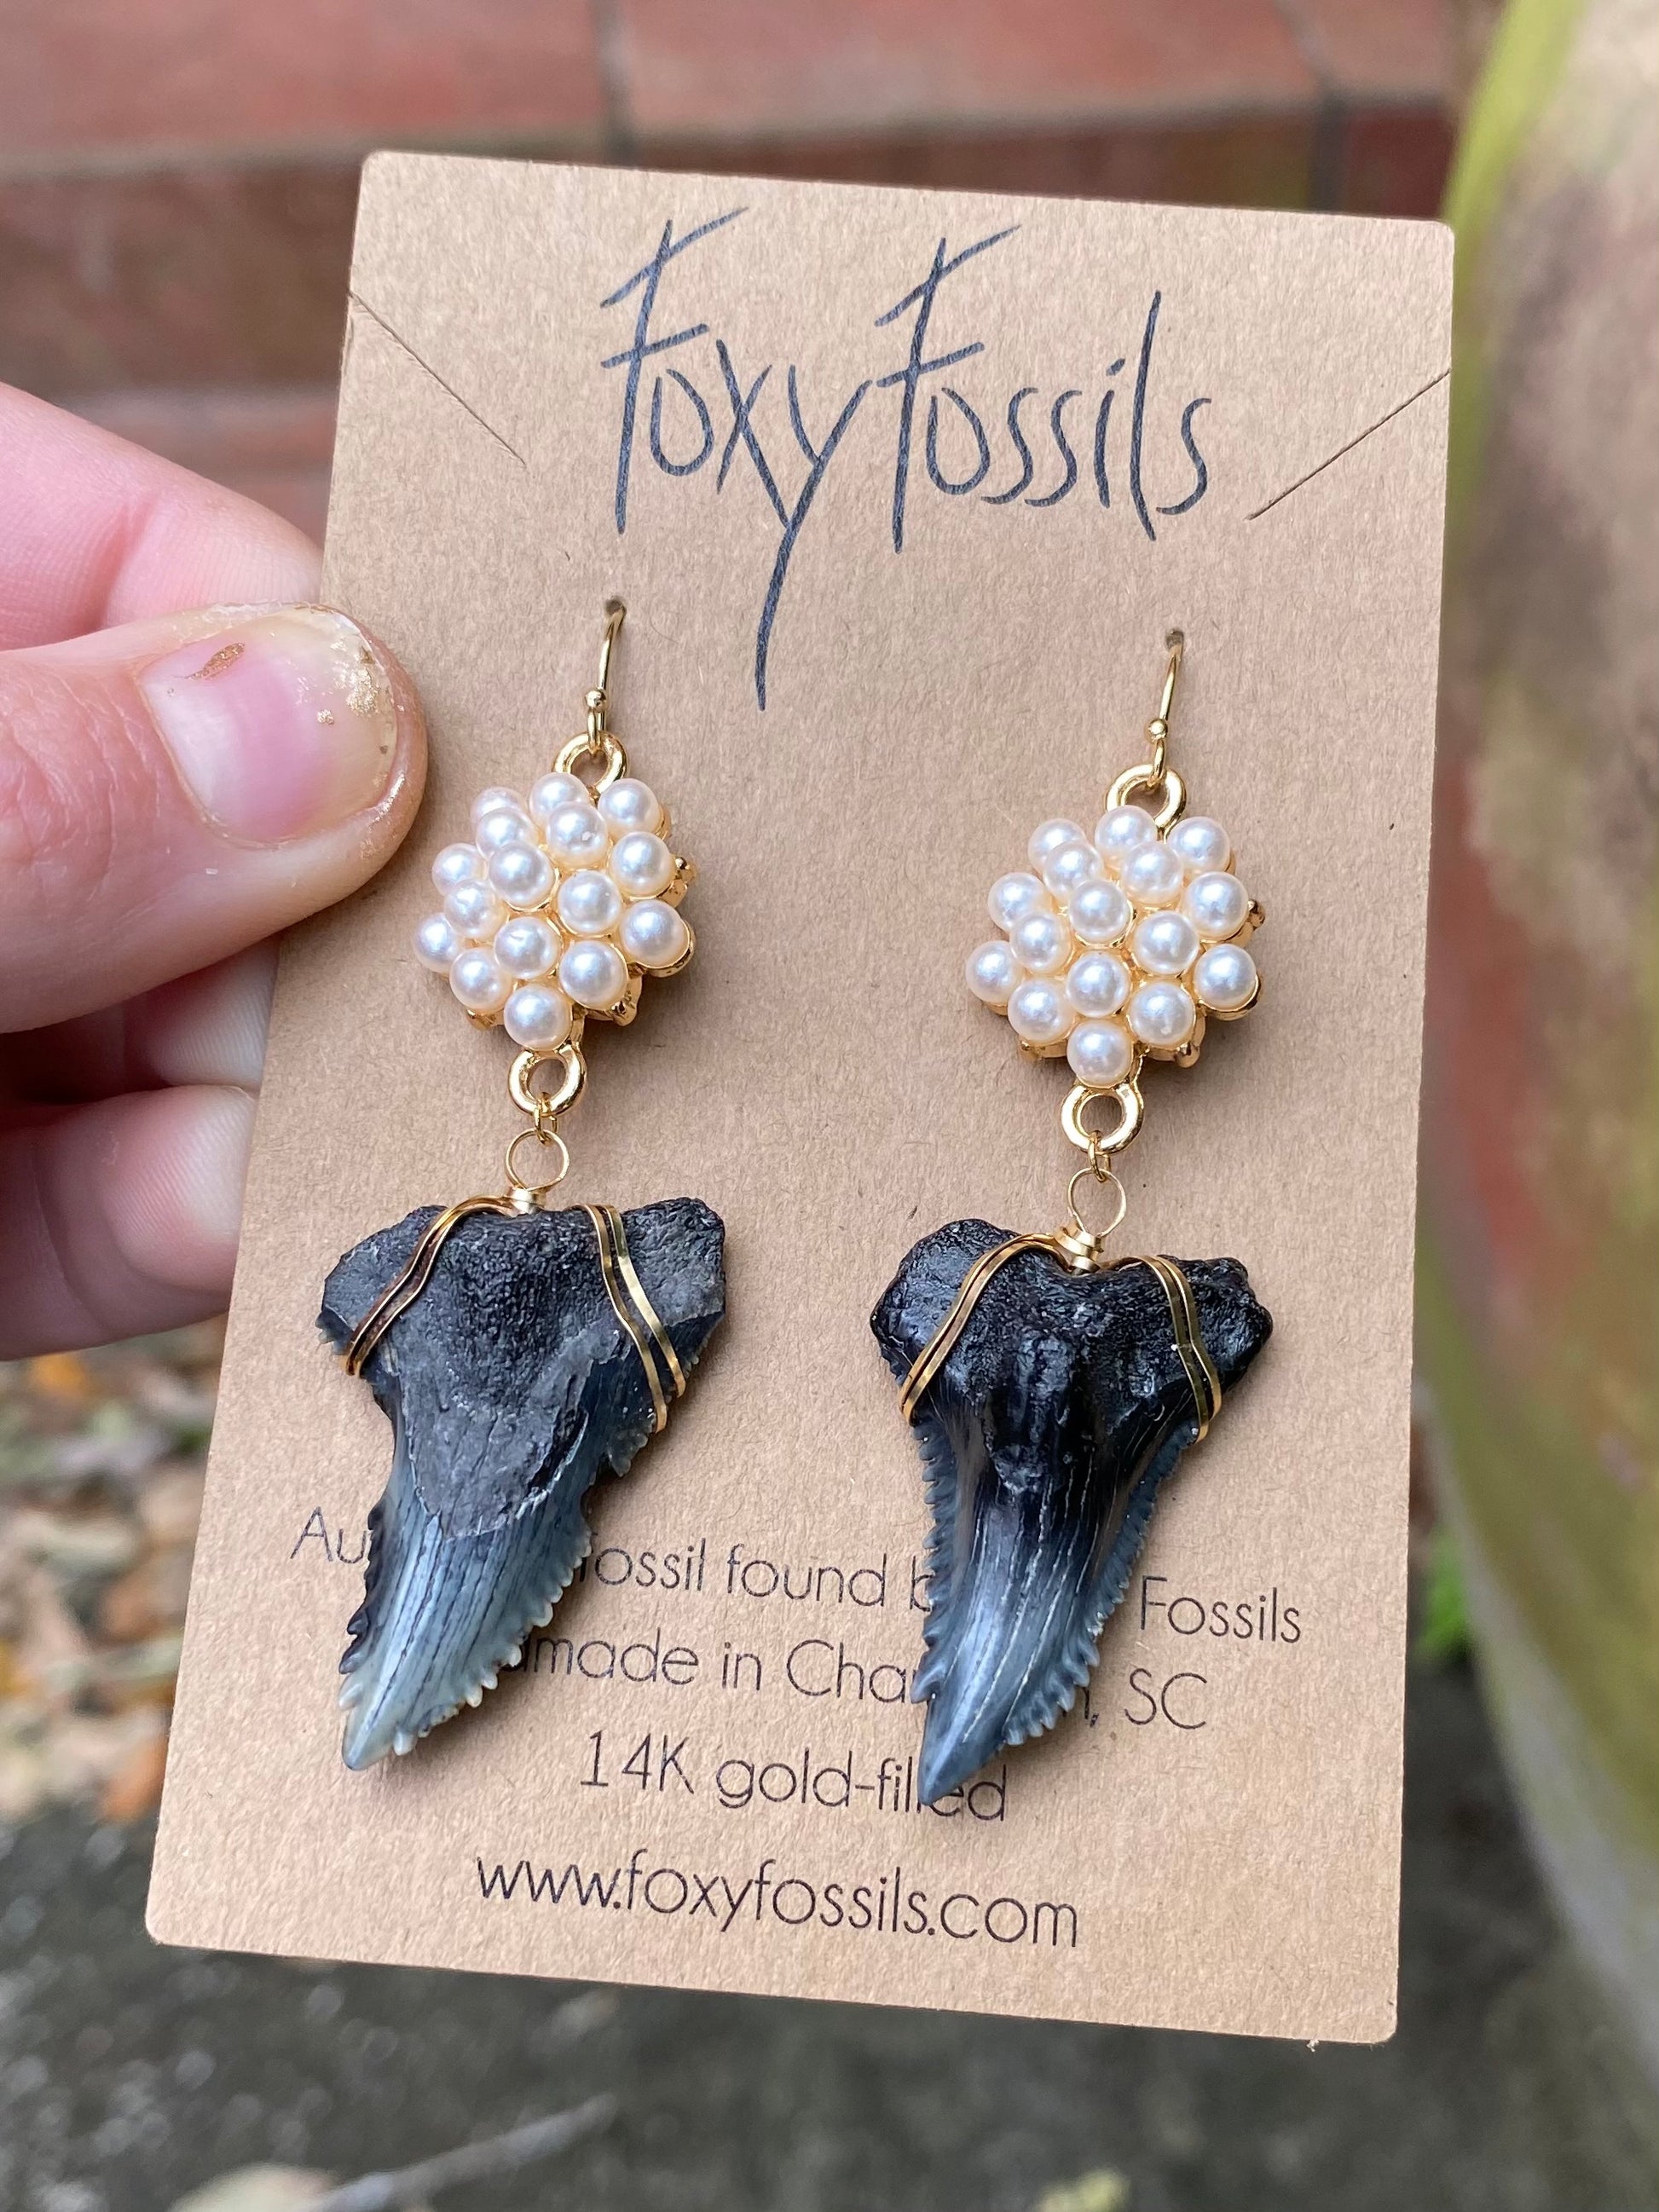 hemipristis serra snaggletooth shark teeth earrings with pearls side view — Foxy Fossils 